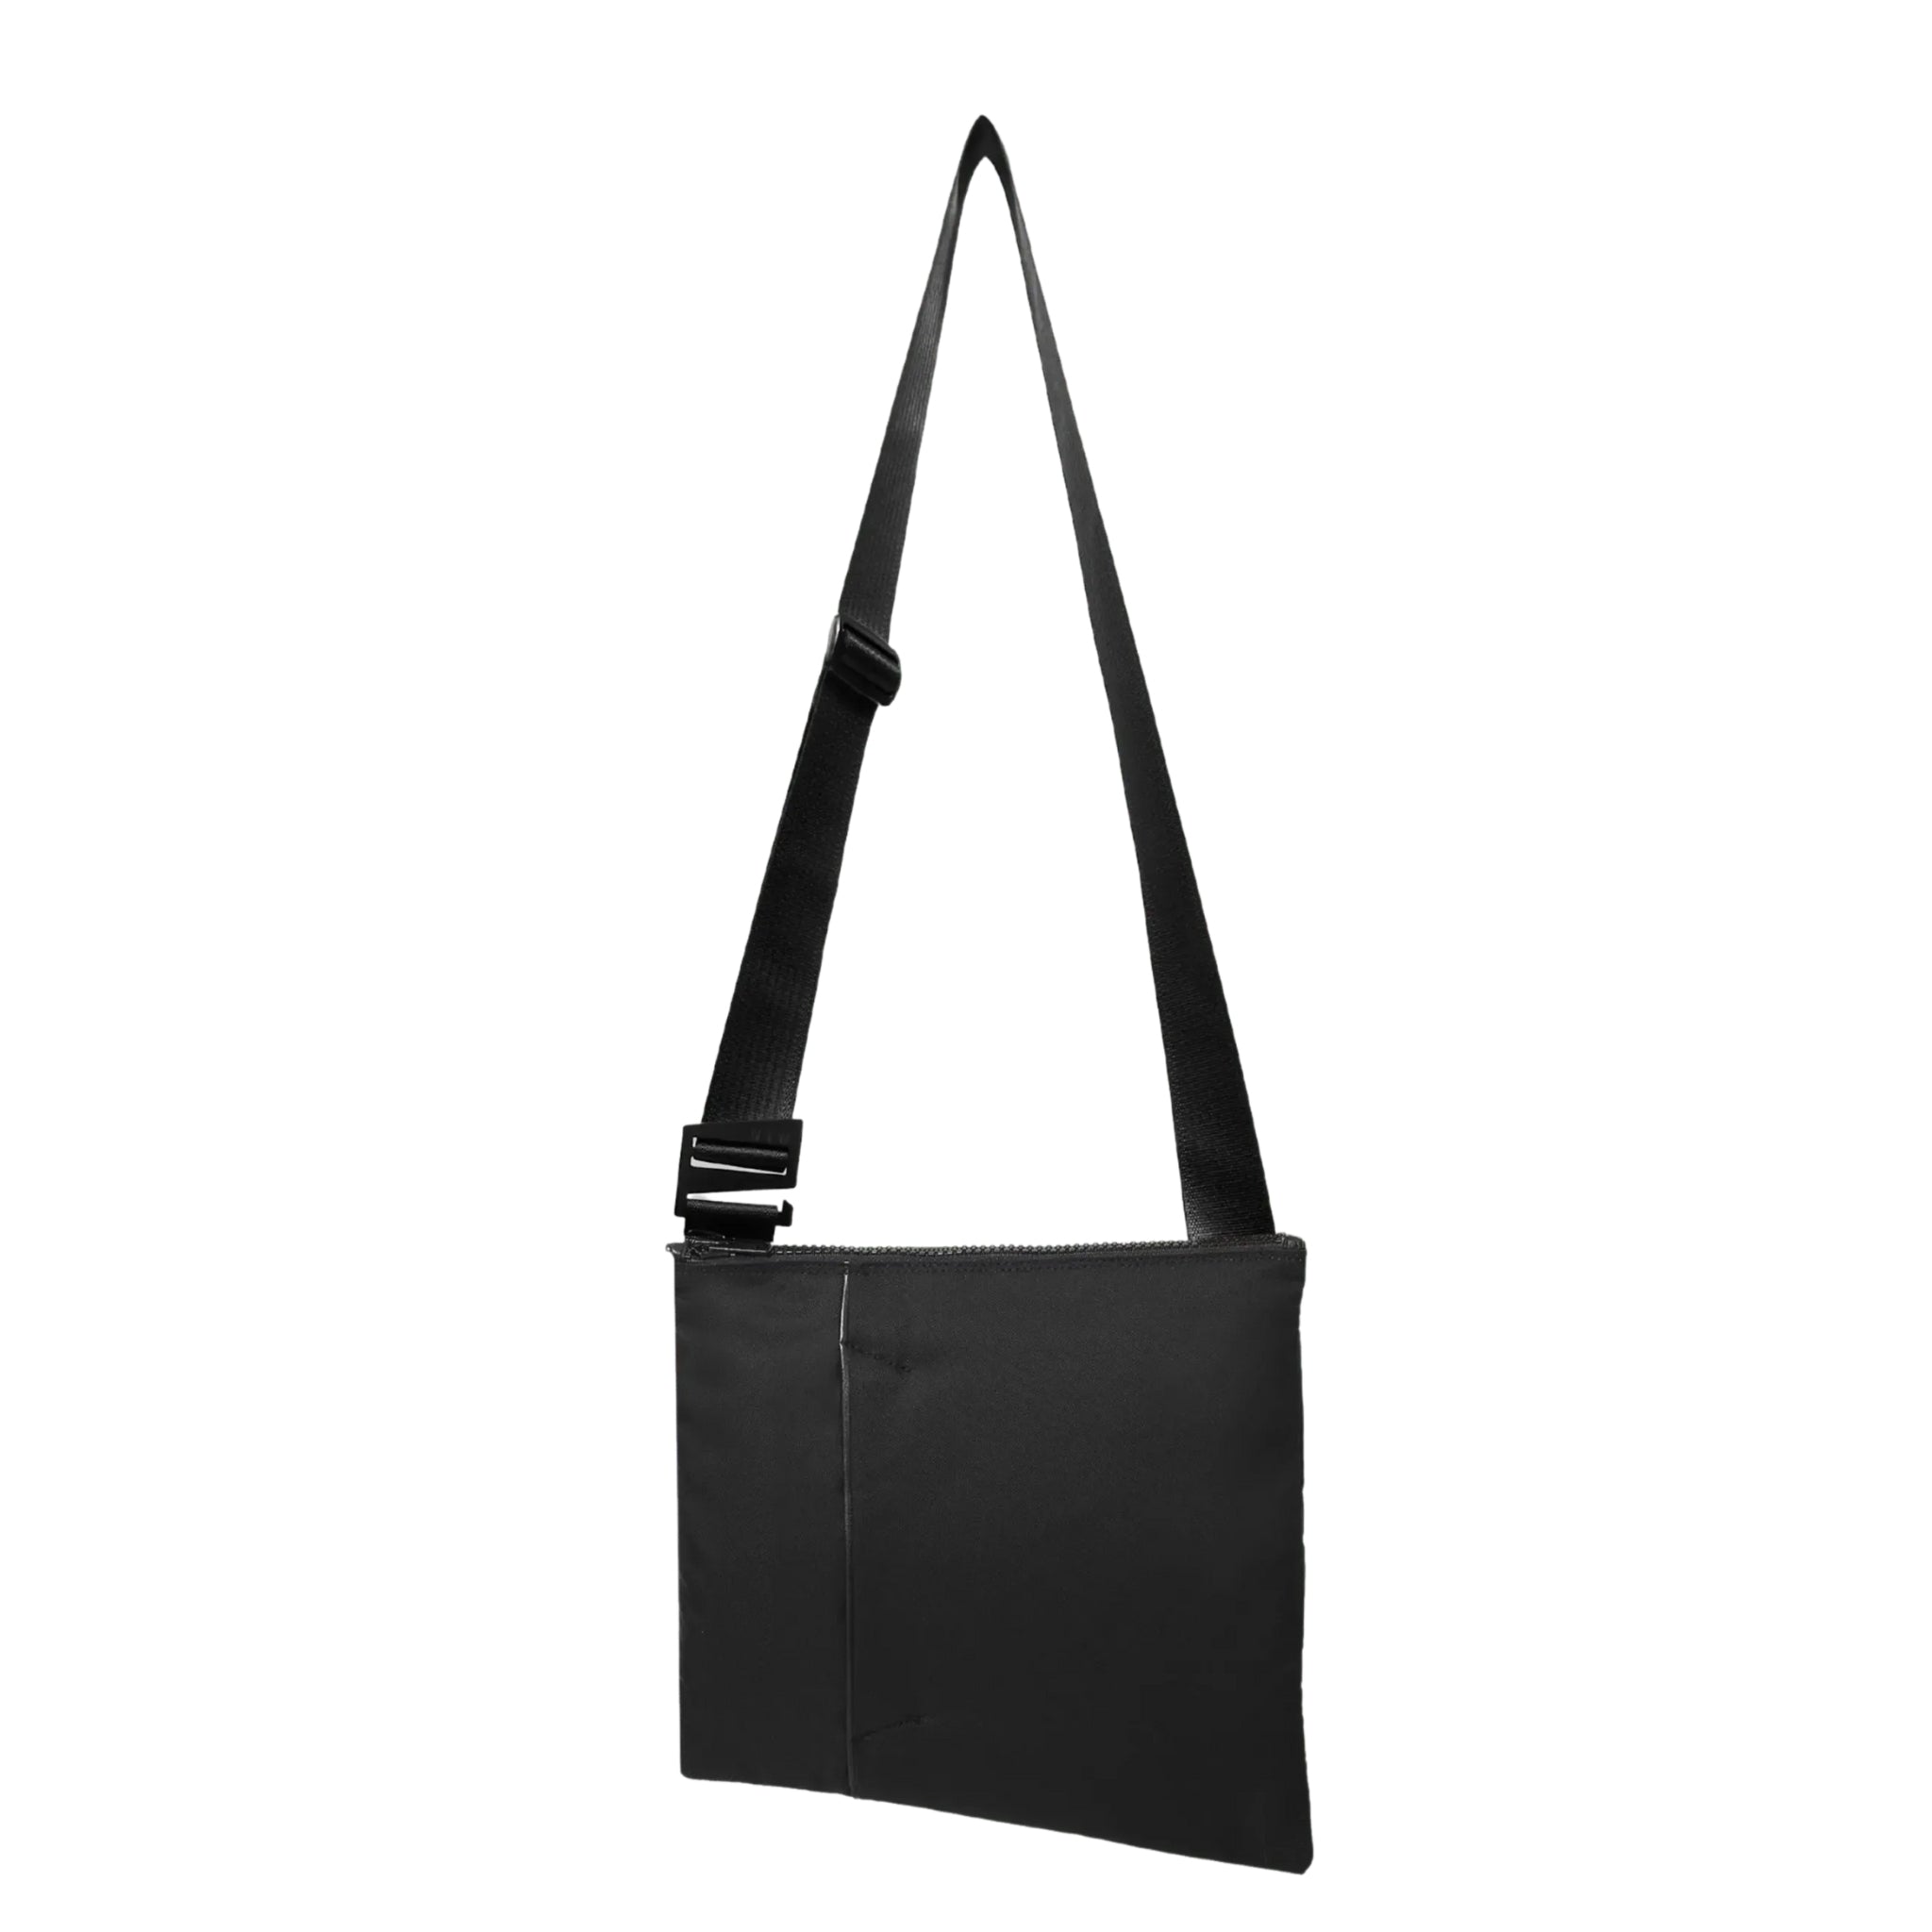 The ANDO satchel in black upcycled fishnets (econyl). Product shown at the front/center of a white background